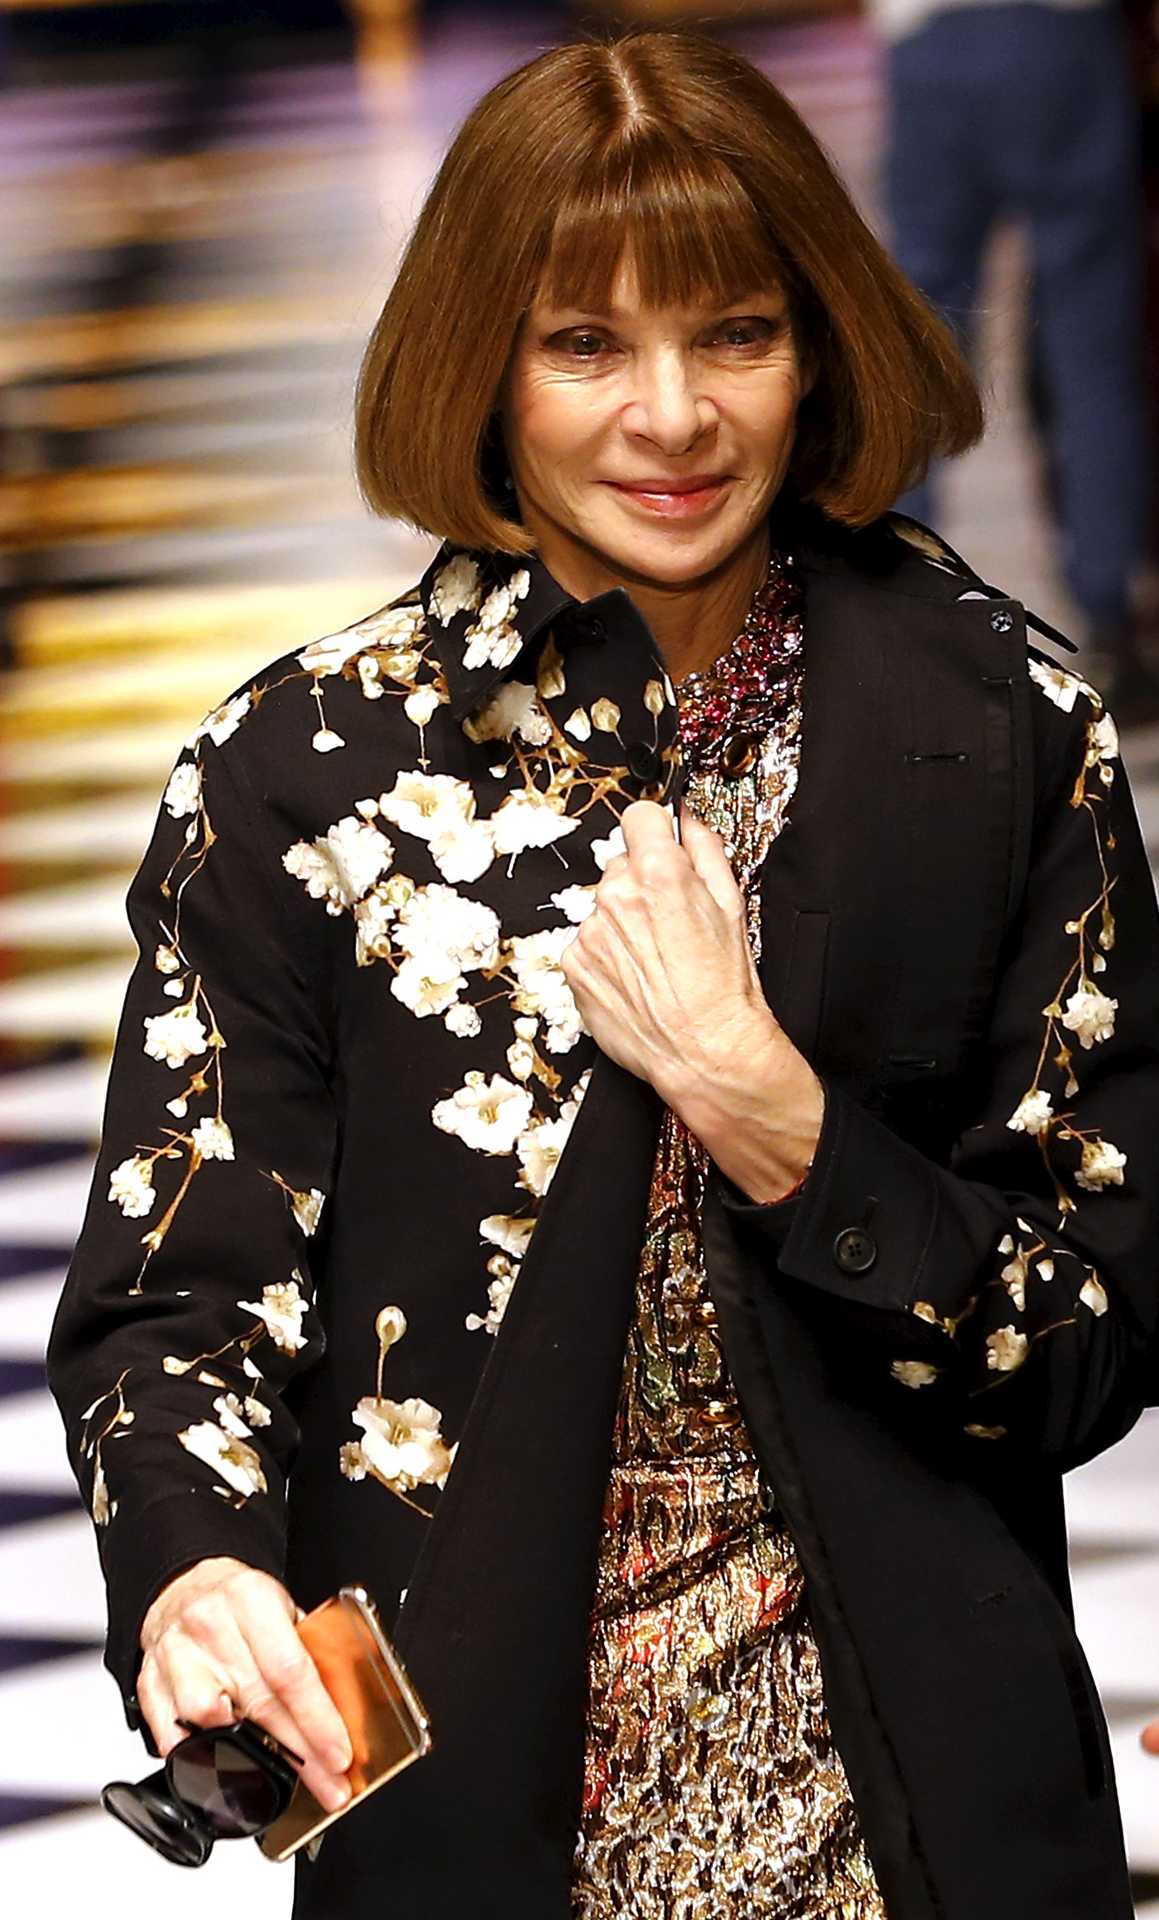 Editor of Vogue U.S. Anna Wintour leaves the catwalk after the Dolce & Gabbana Autumn/Winter 2016 woman collection during Milan Fashion Week